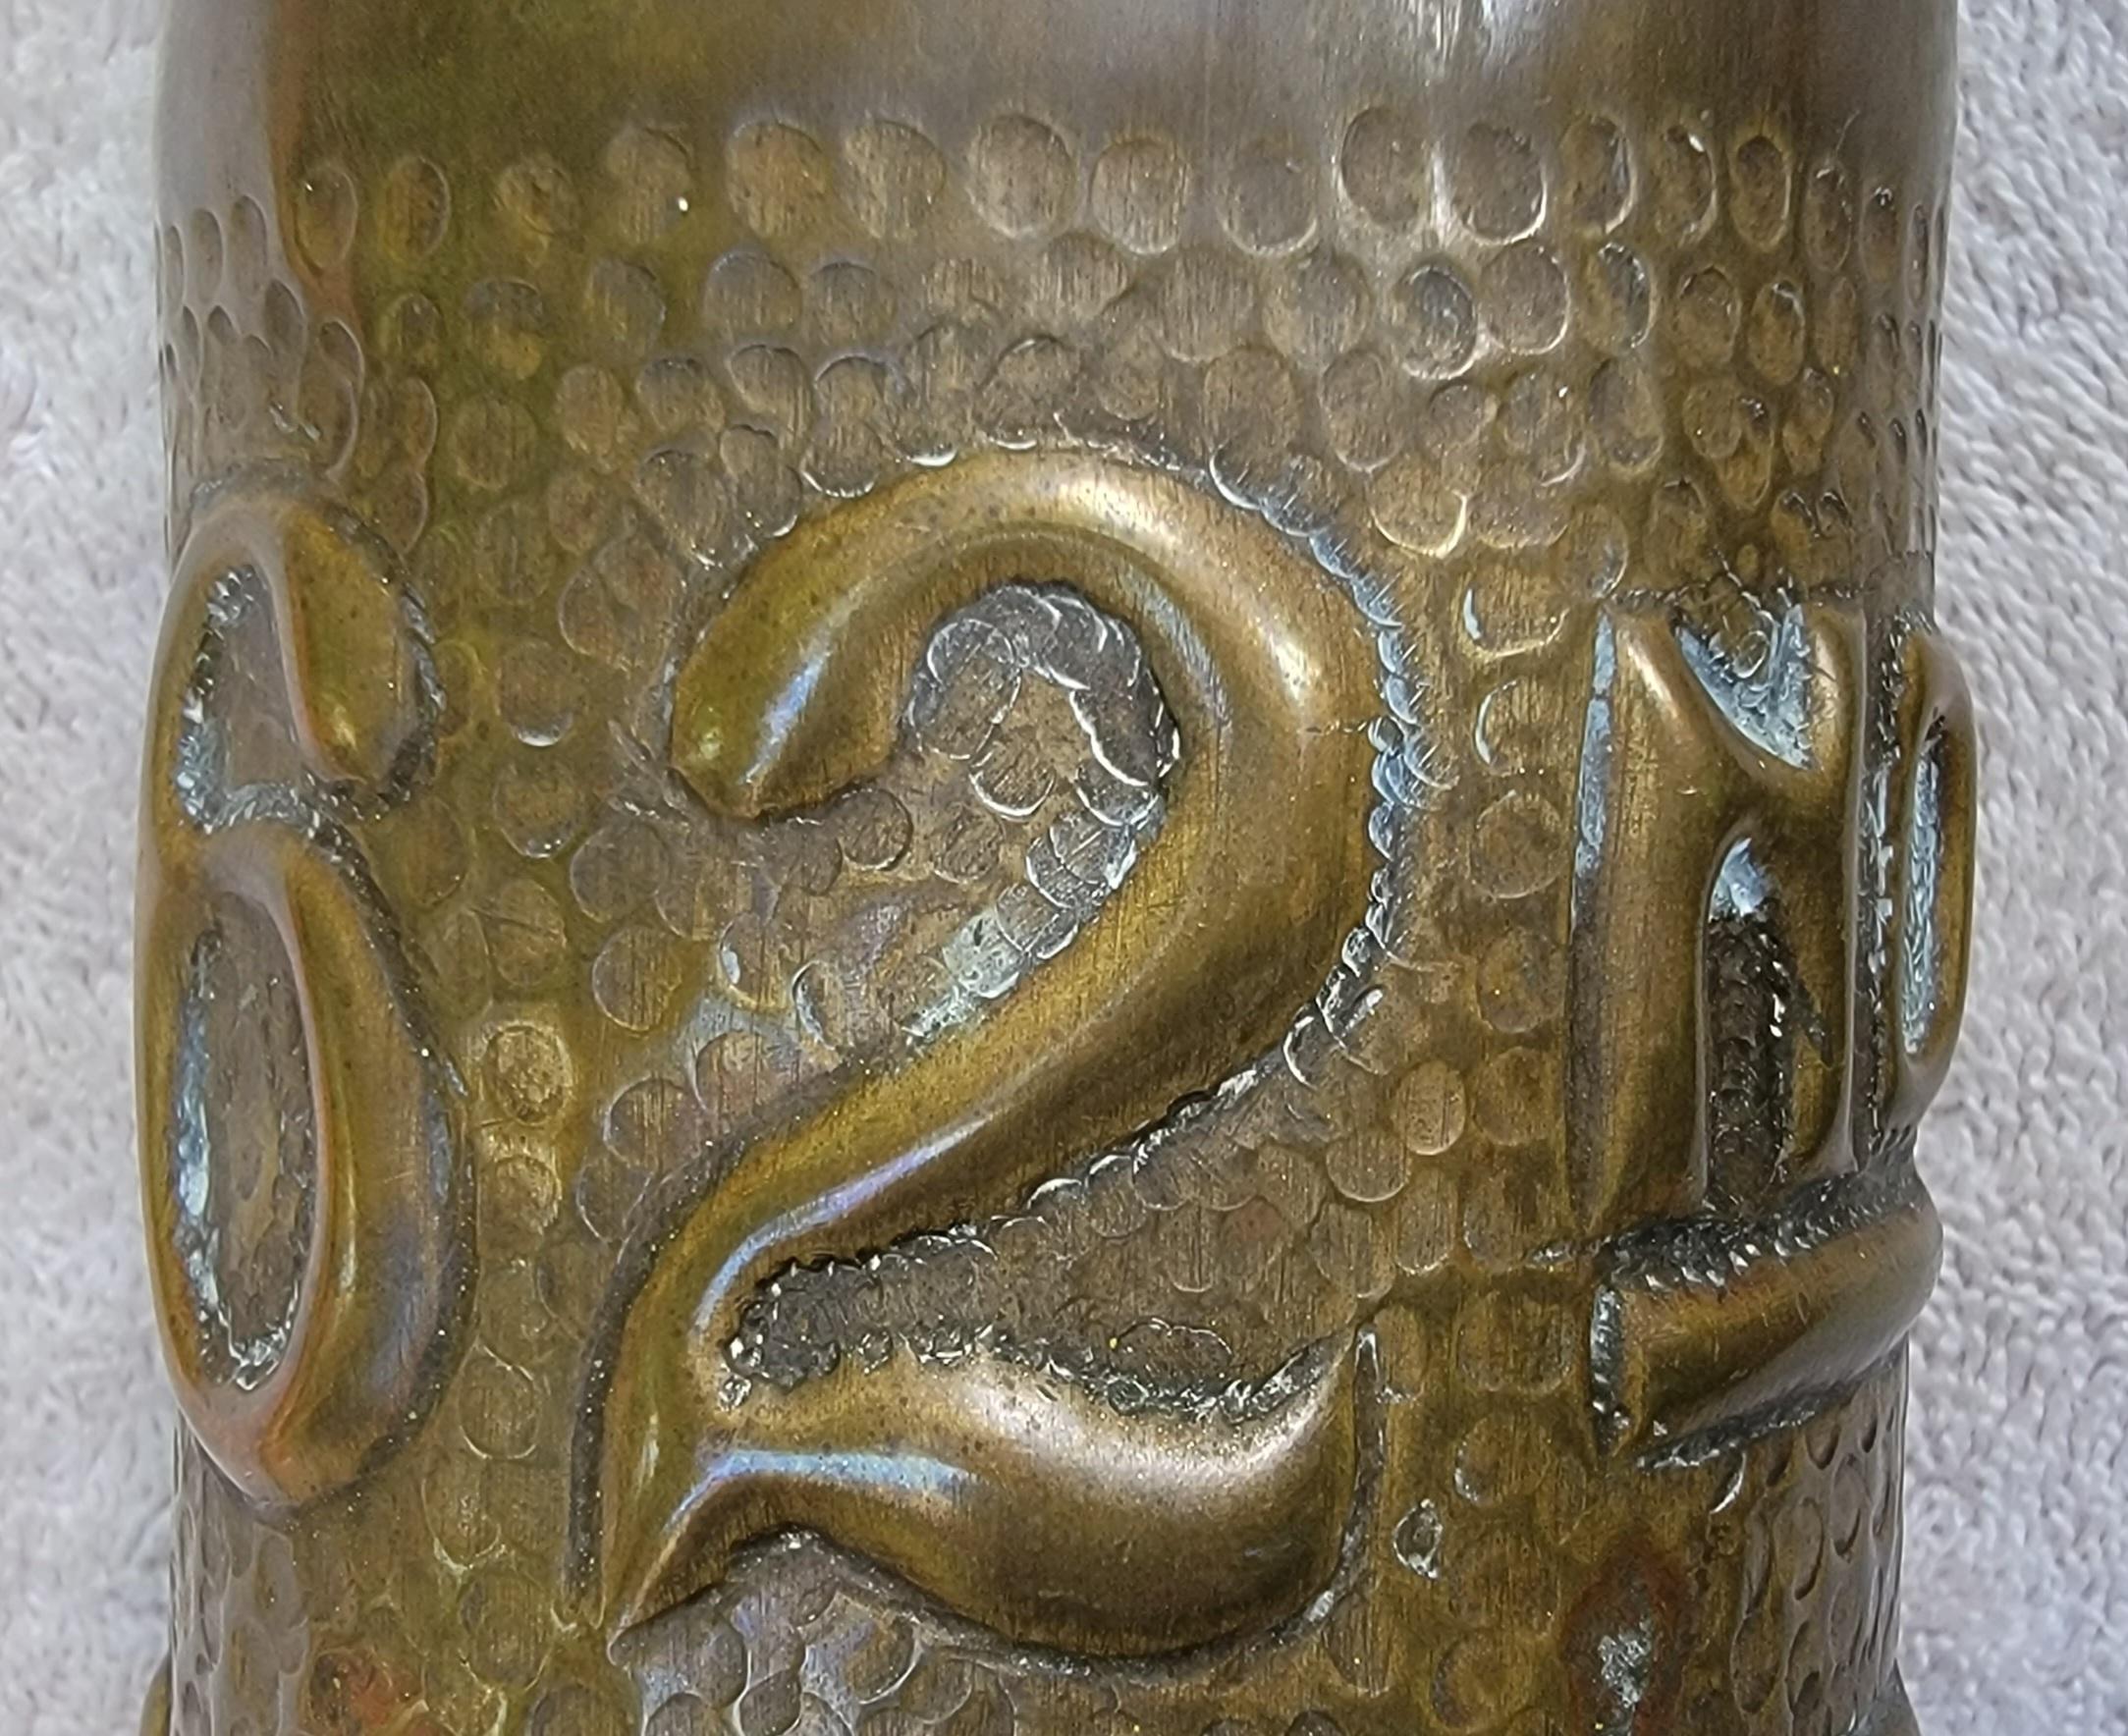 Brass Trench Art Vase Dated 1918-19 For Sale